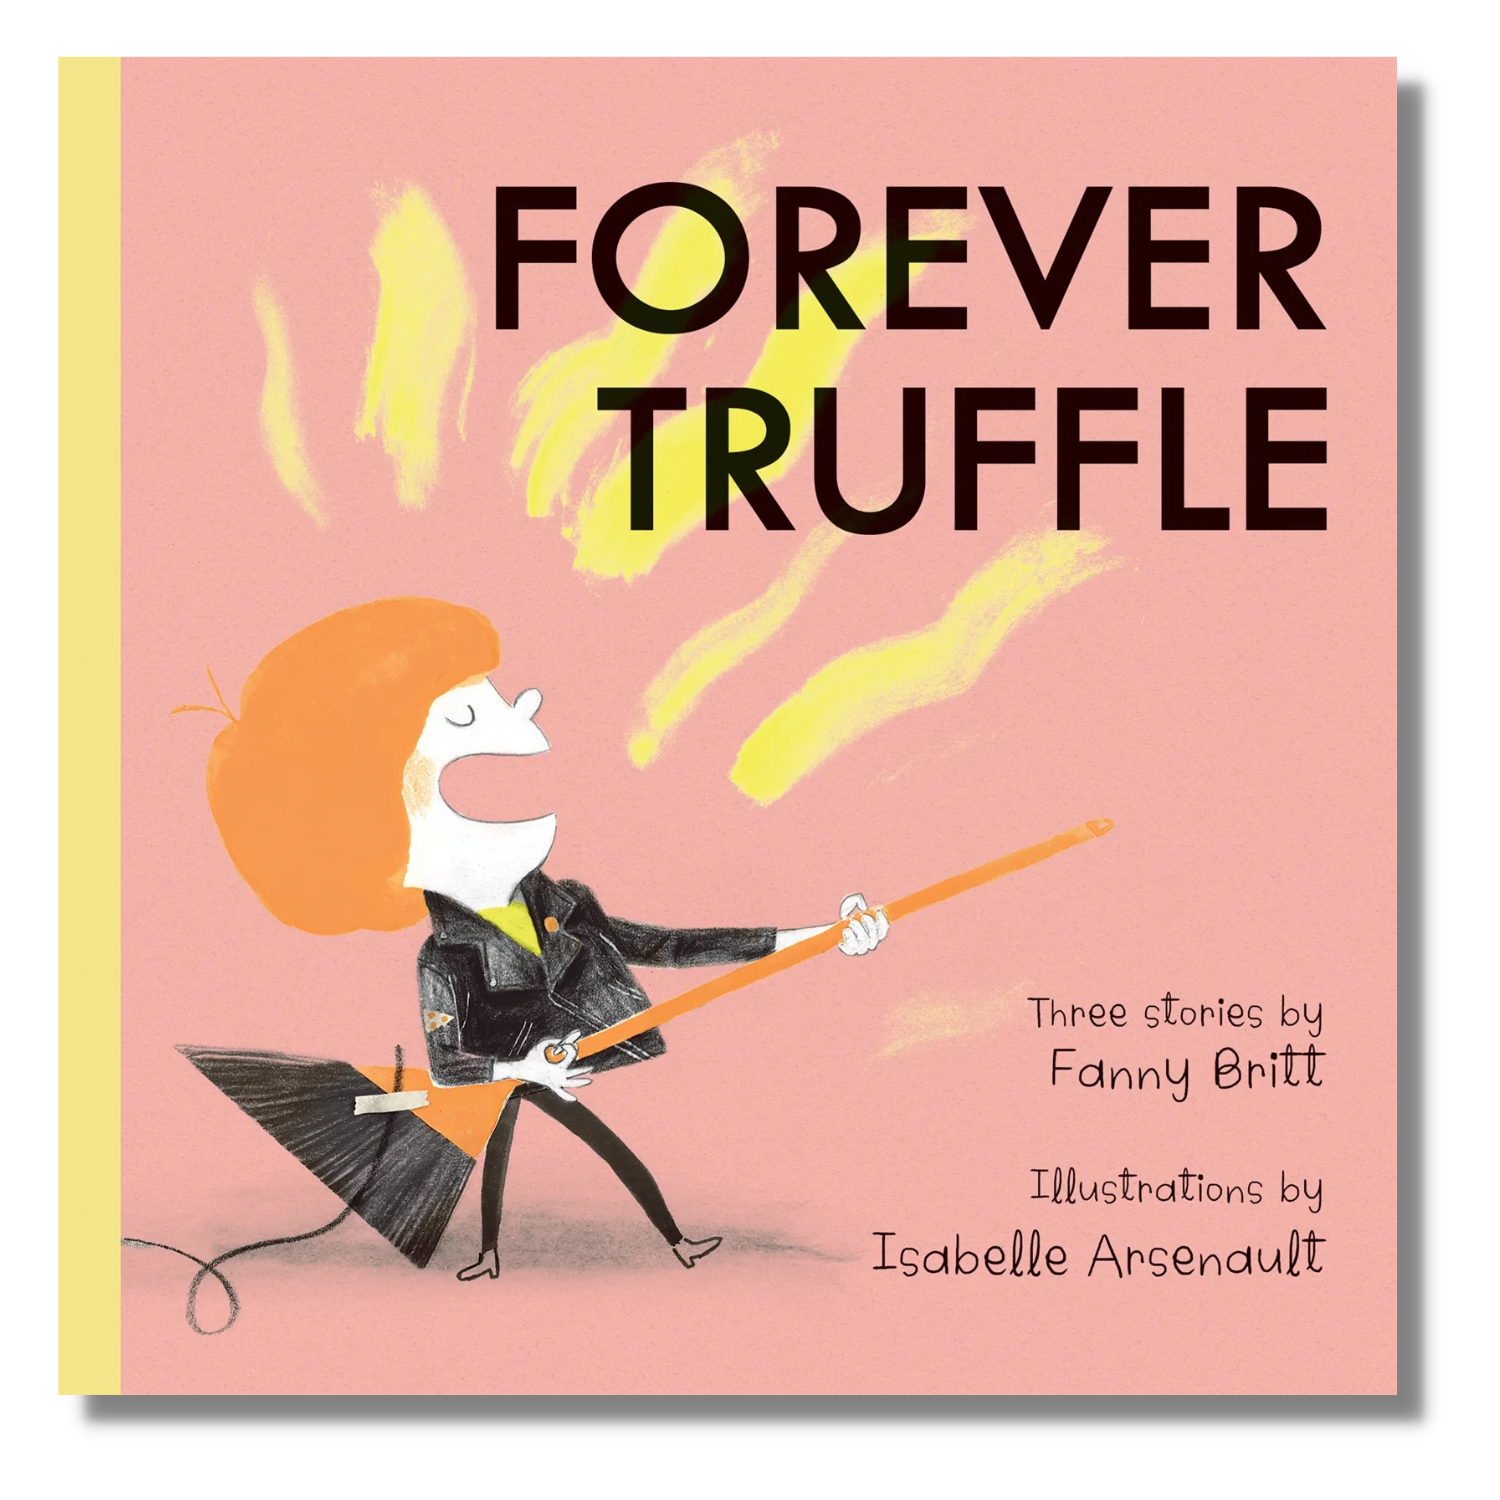 The cover of "Forever Truffle"